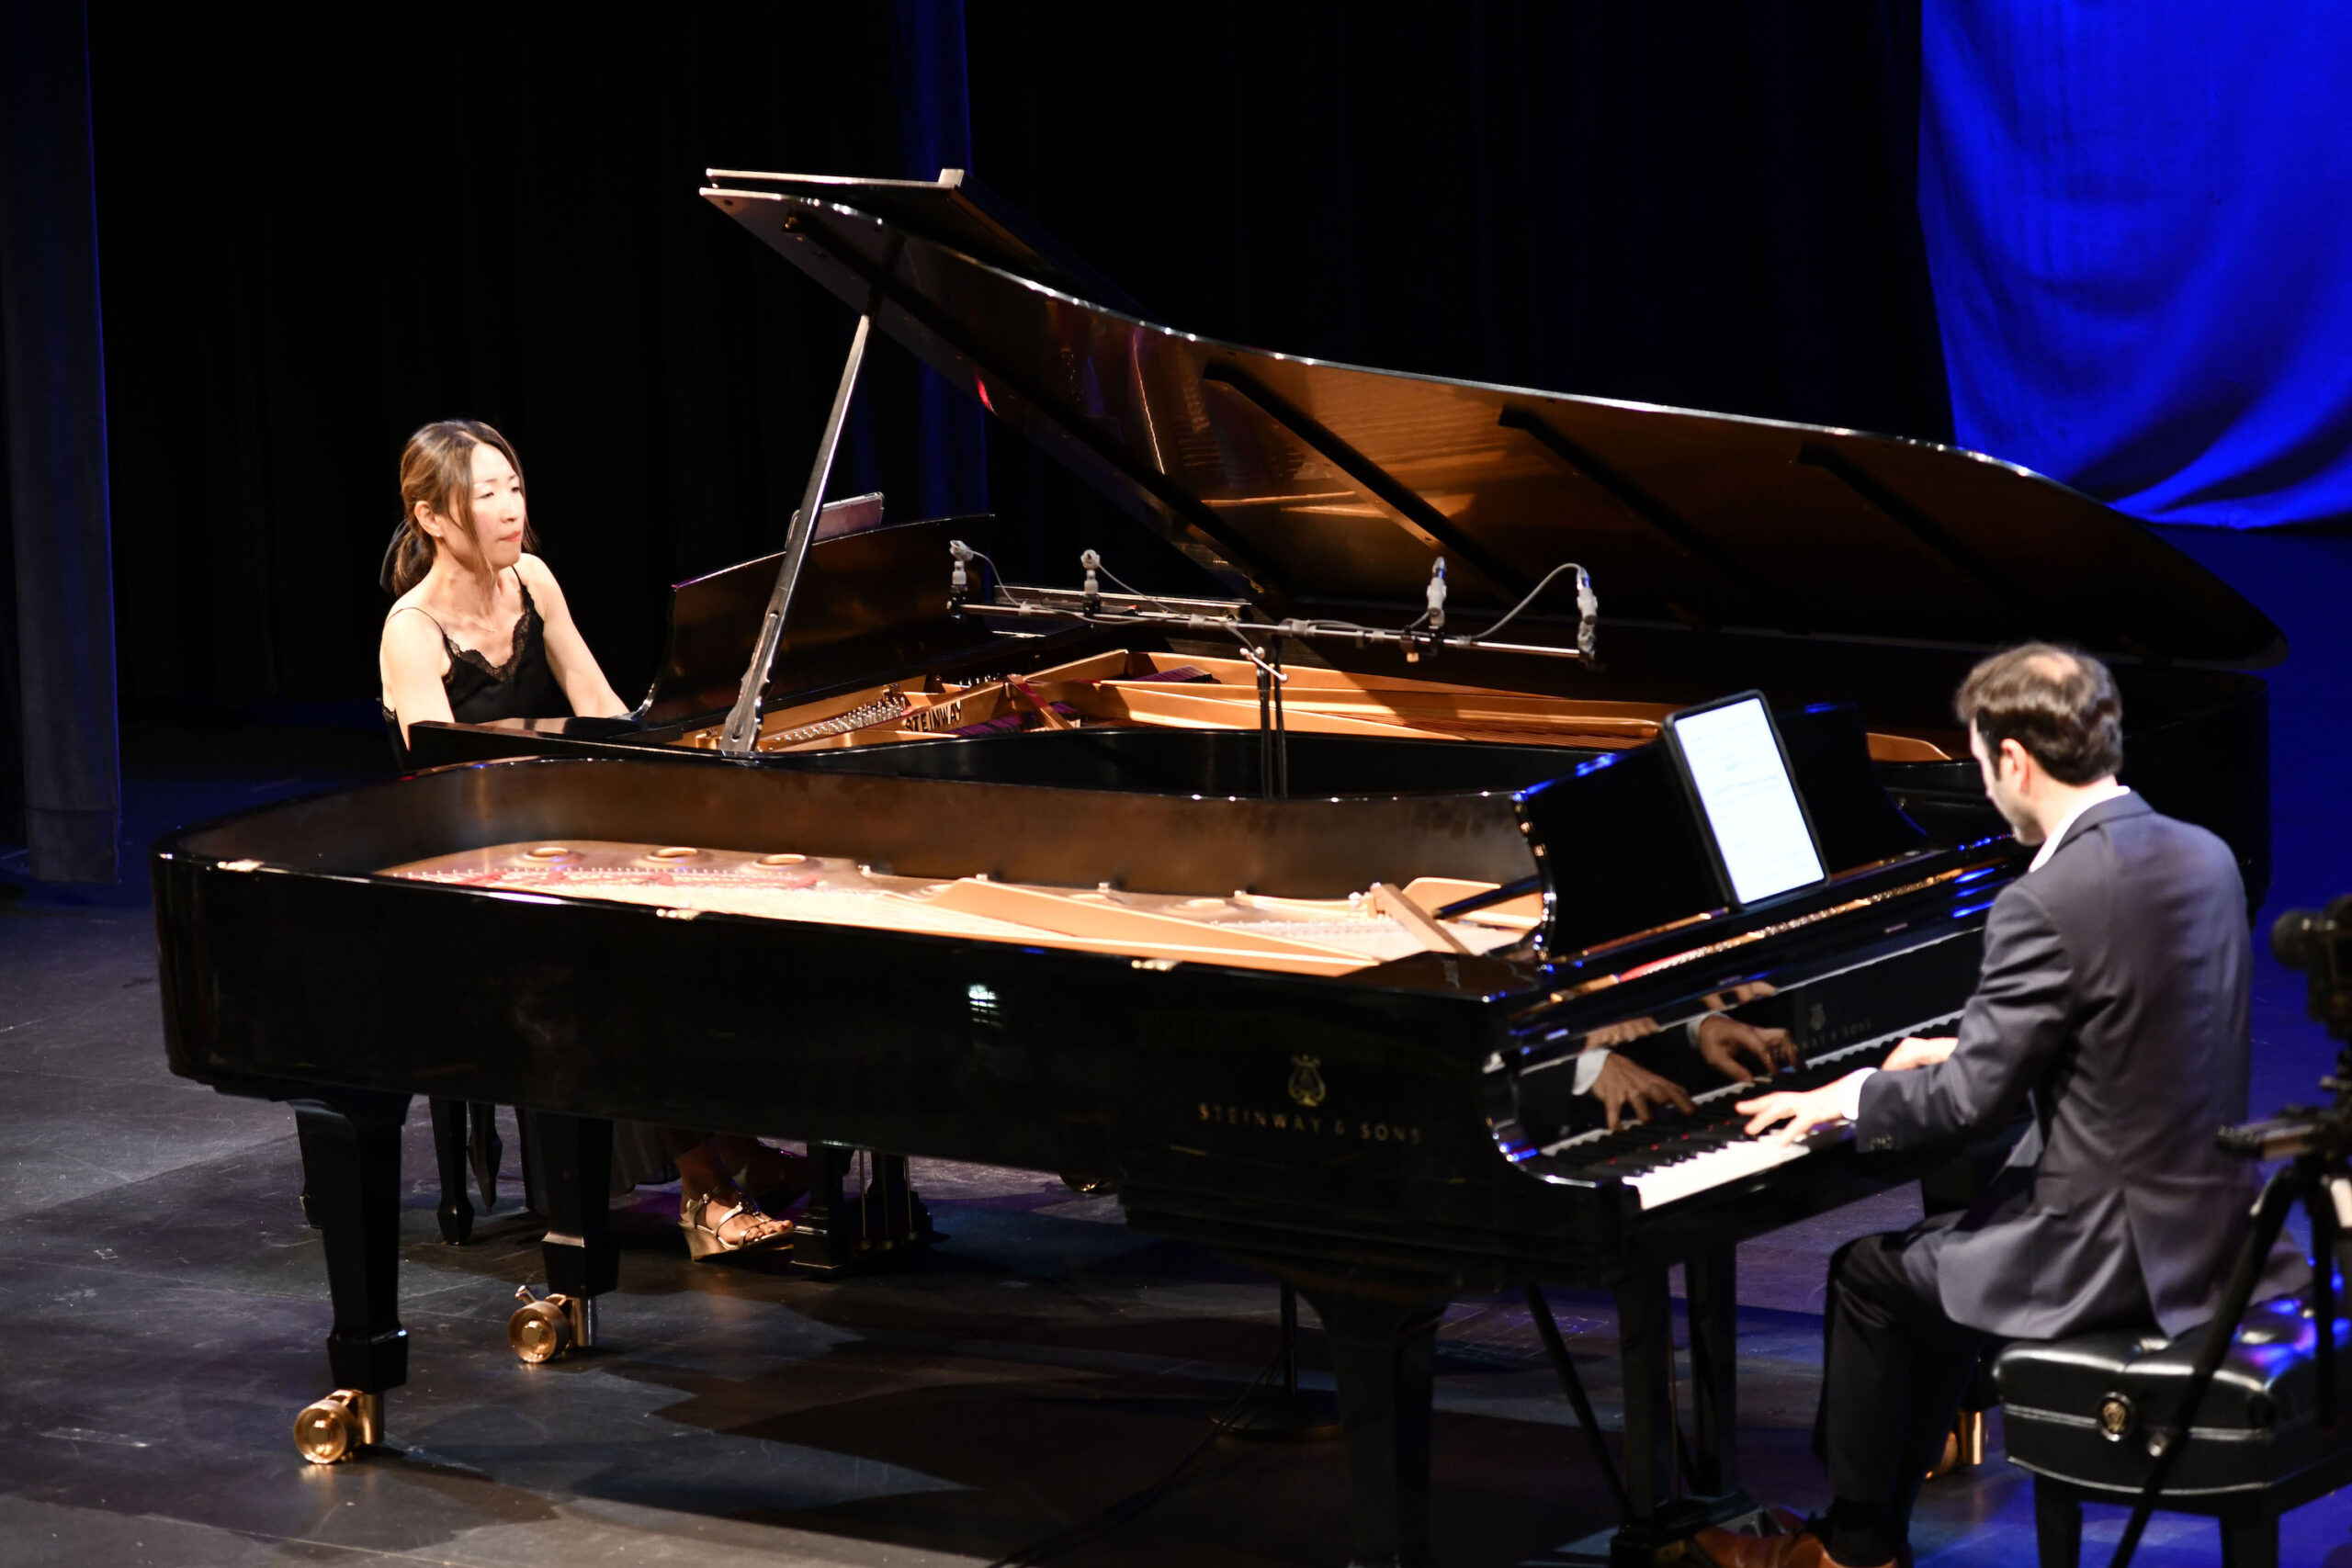 Soyeon Kate Lee and Ran Dank performing a Pianofest concert at Stony Brook
Southampton on in August 2021. DANA SHAW